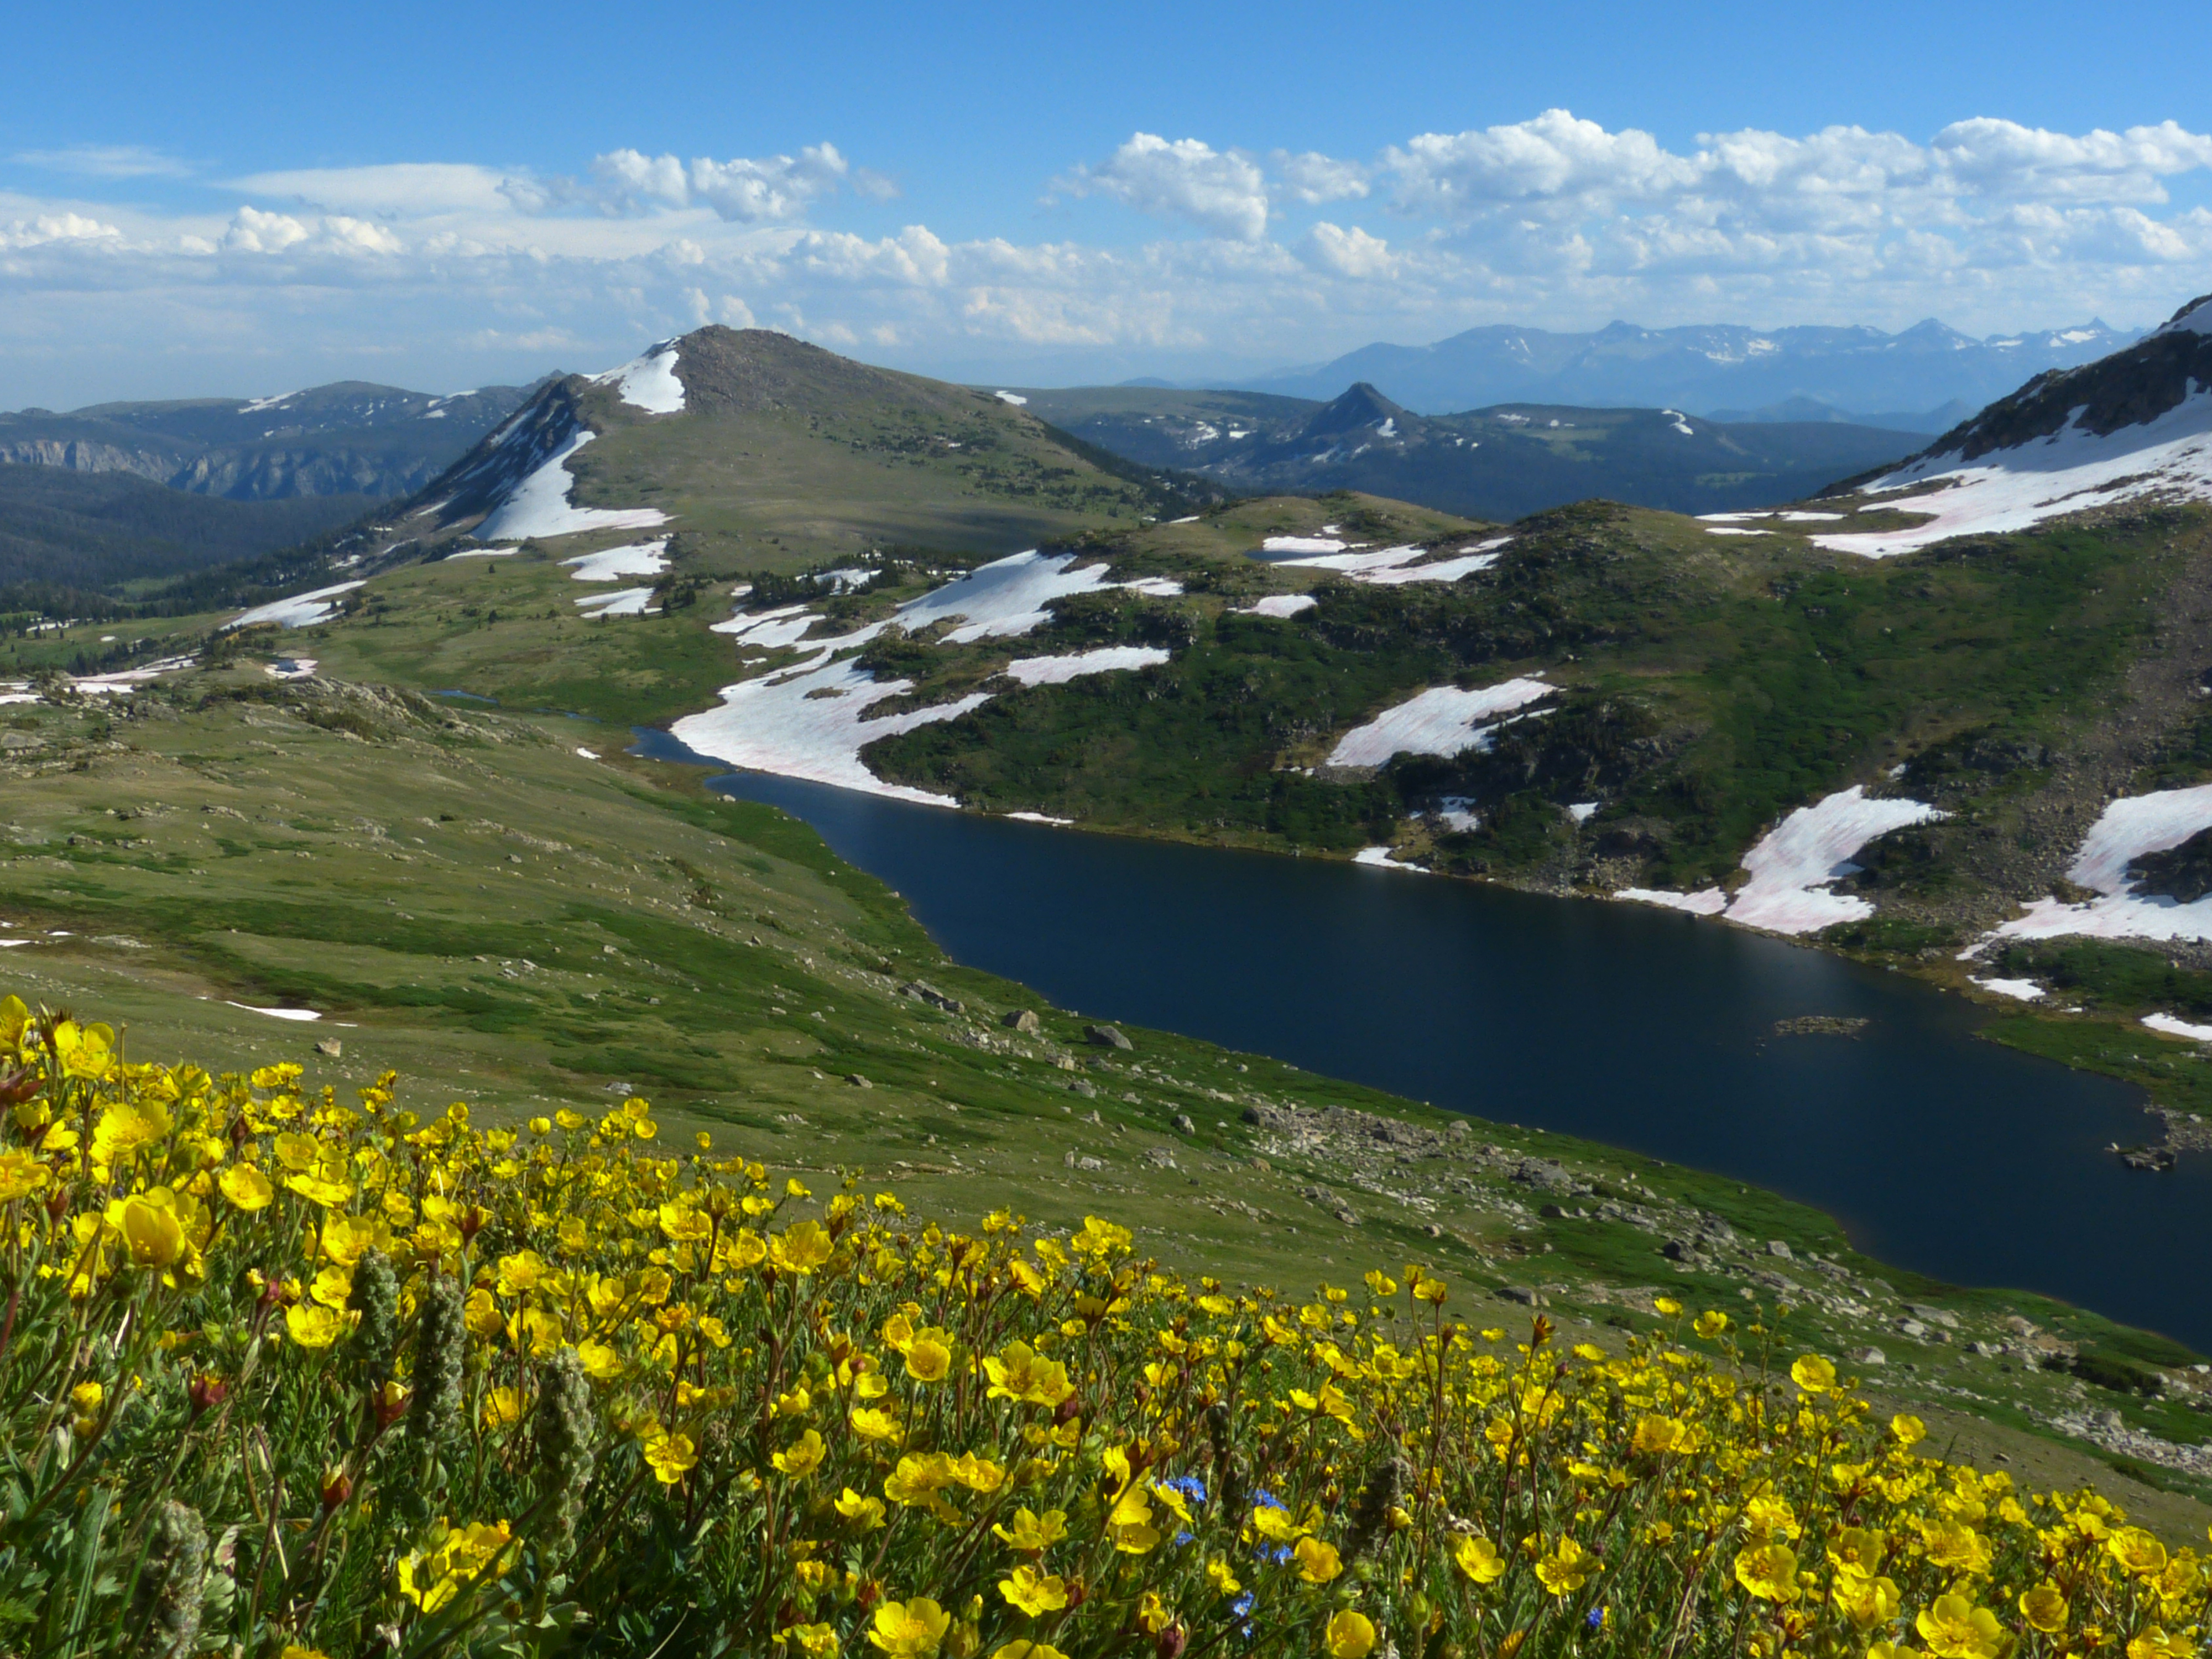 Snow buttercups, Gardner Lake  -  Beartooth Scenic Byway, Shoshone National Forest, Wyoming